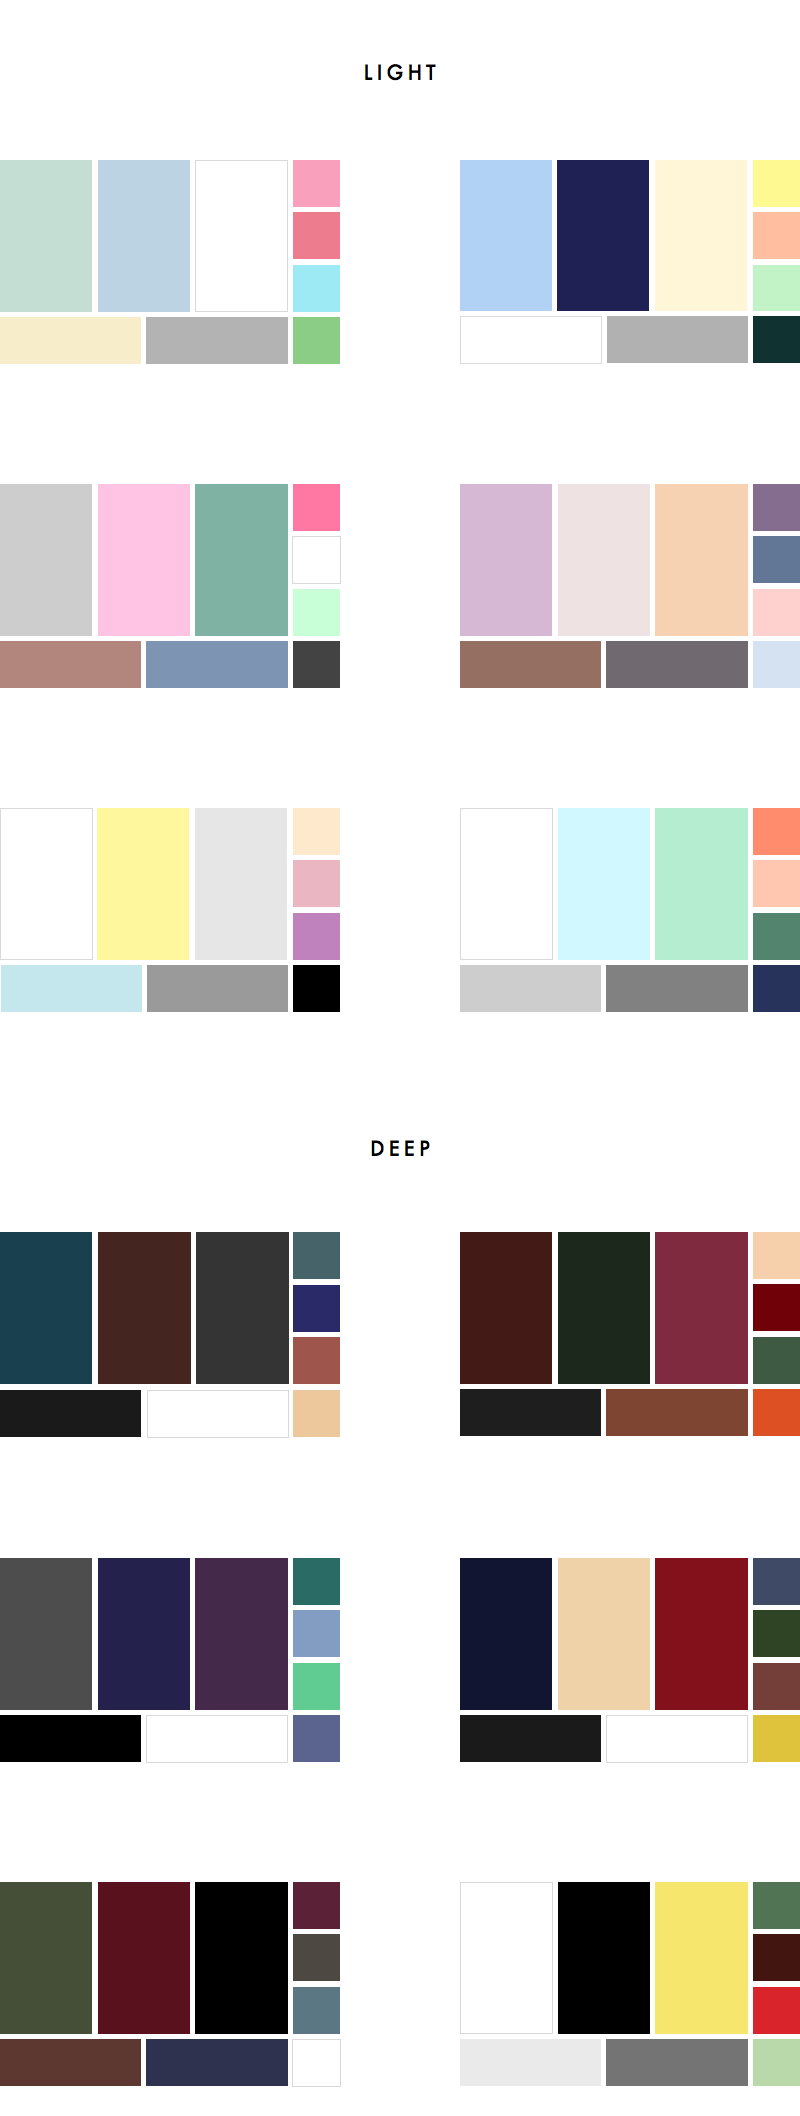 36 Colour Palettes for your Wardrobe Part III: Light vs Deep